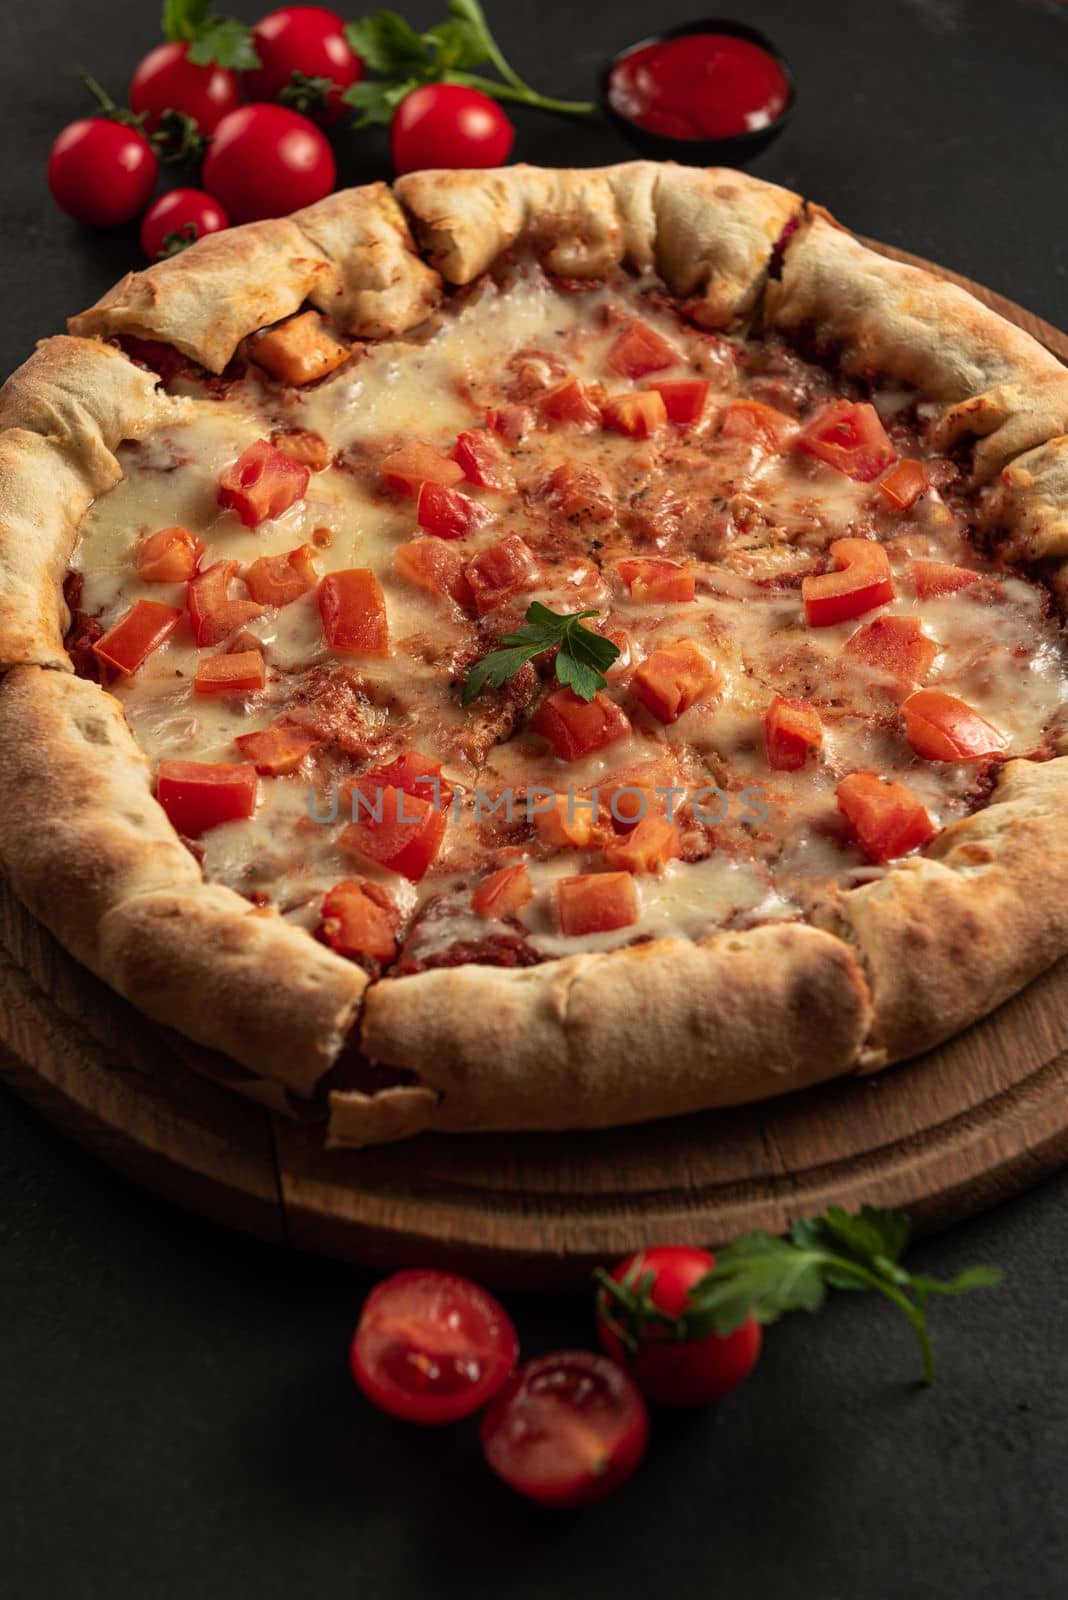 Vertical shot of a pizza with tomatoes on a dark background by gulyaevstudio